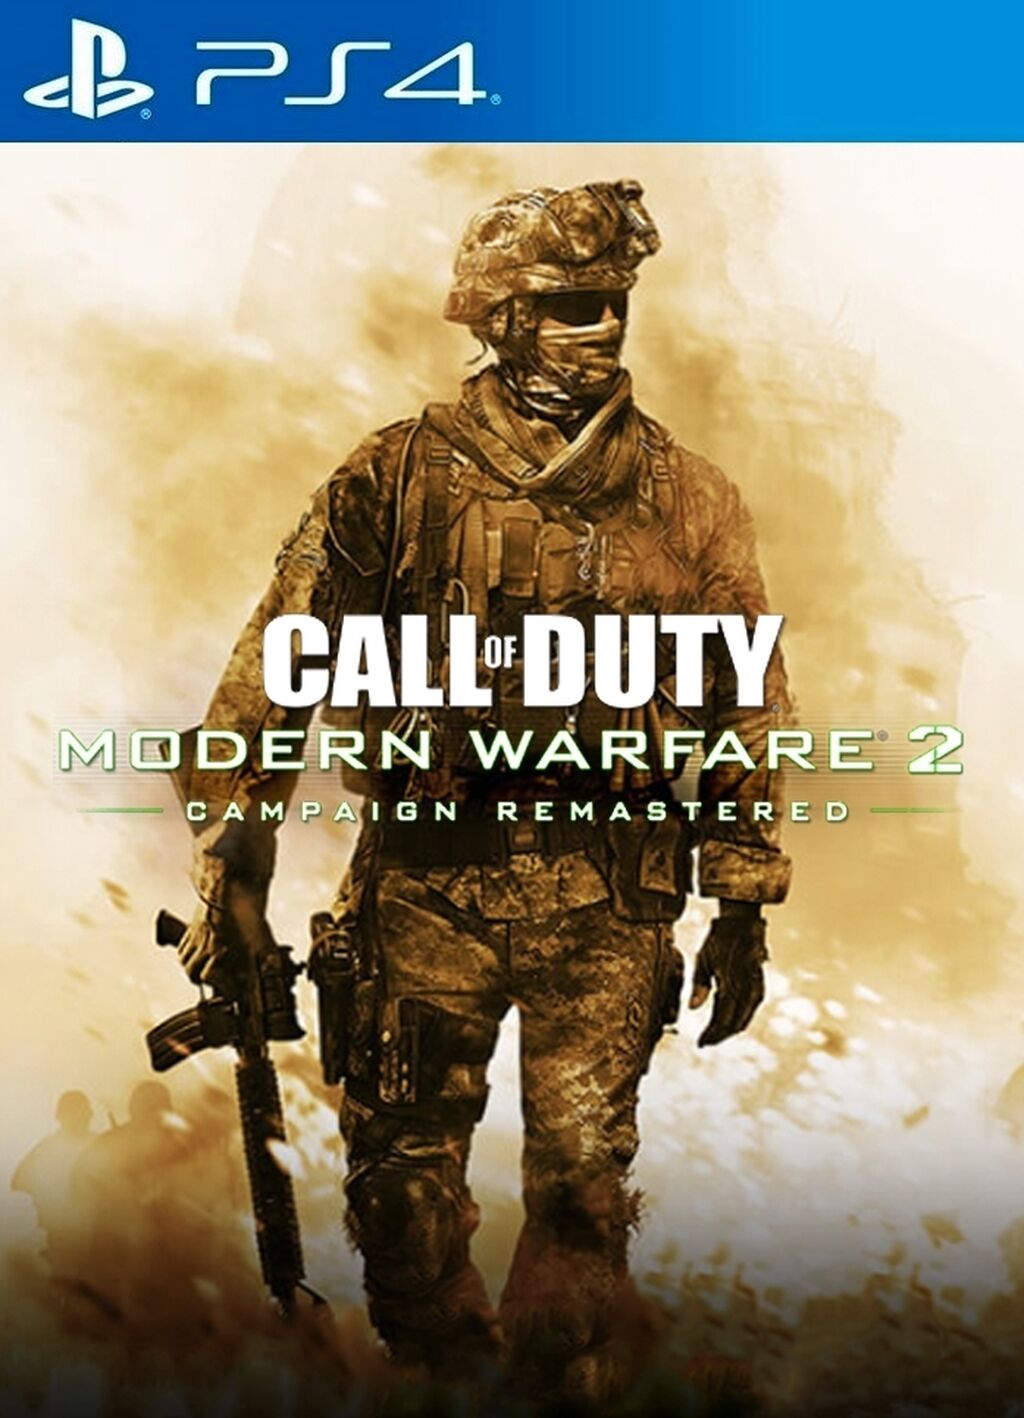 Call of duty remastered ps4. Cod mw2 ps4 диск. Cod Remastered ps4. Call of Duty Modern Warfare 2 ps4. Mw2 Remastered ps4.